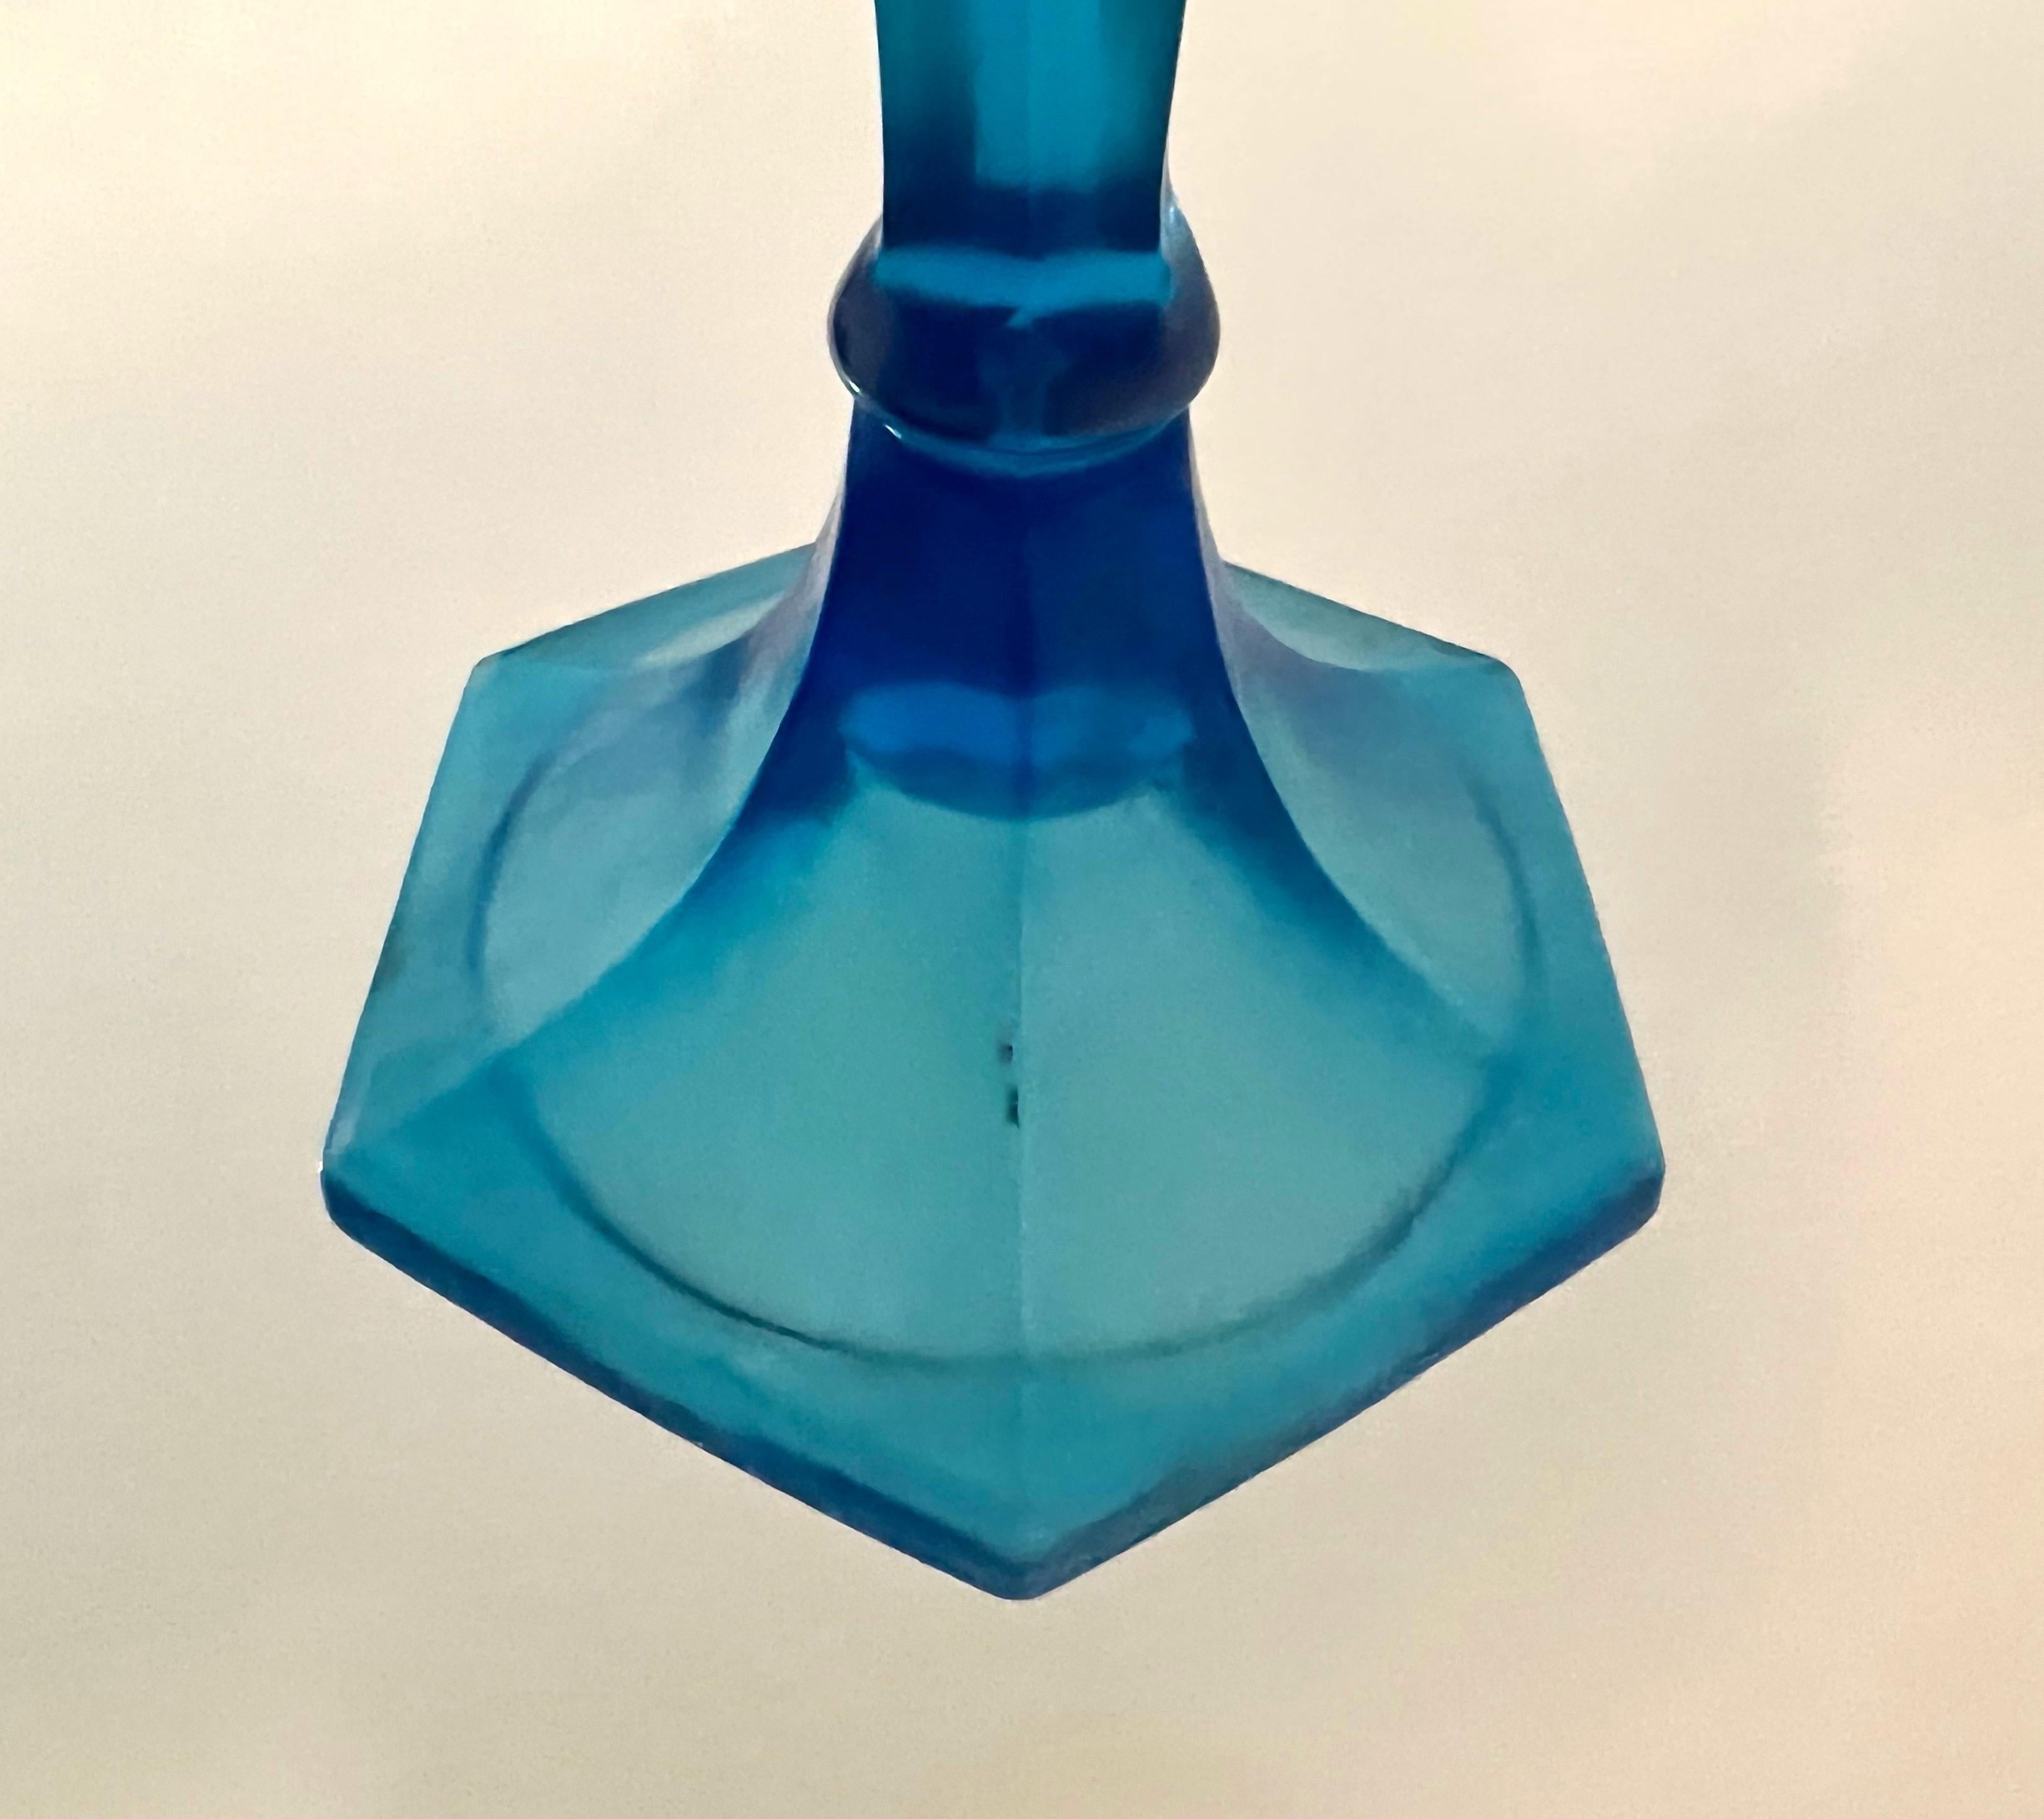 Mid-20th Century Blue Favrile Glass Candleholders, 1950s For Sale